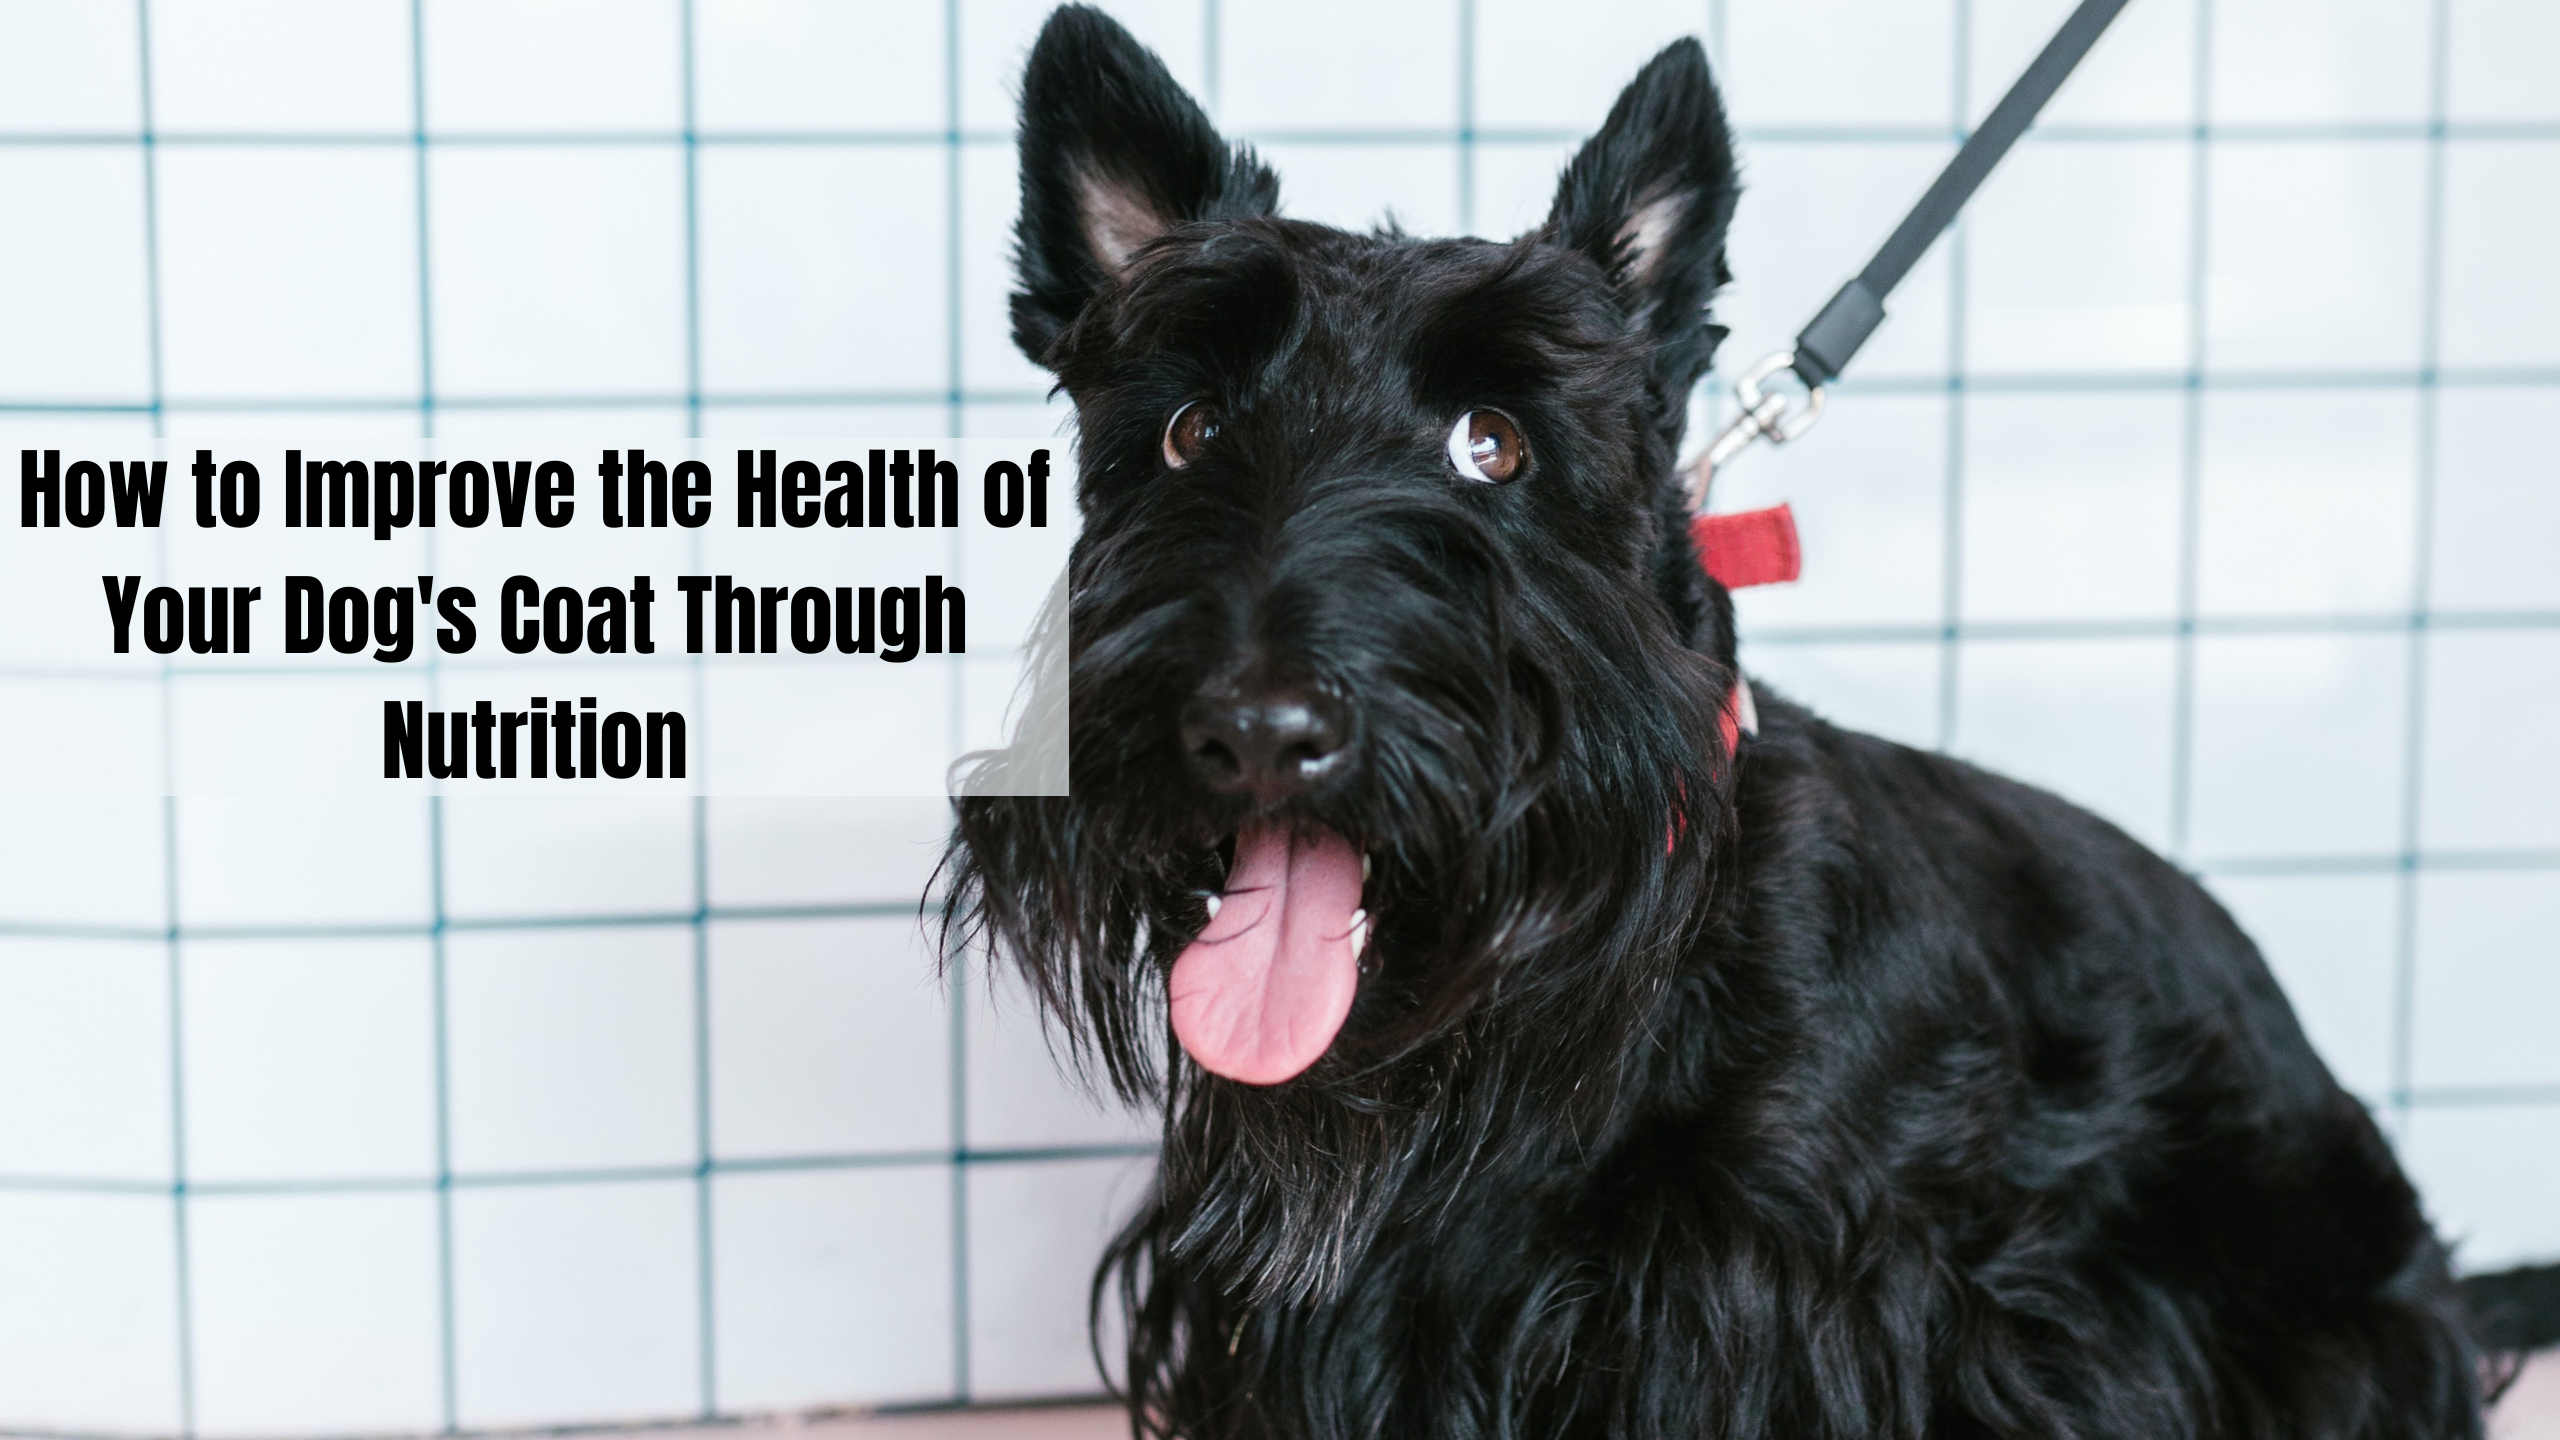 How to Improve the Health of Your Dog’s Coat Through Nutrition